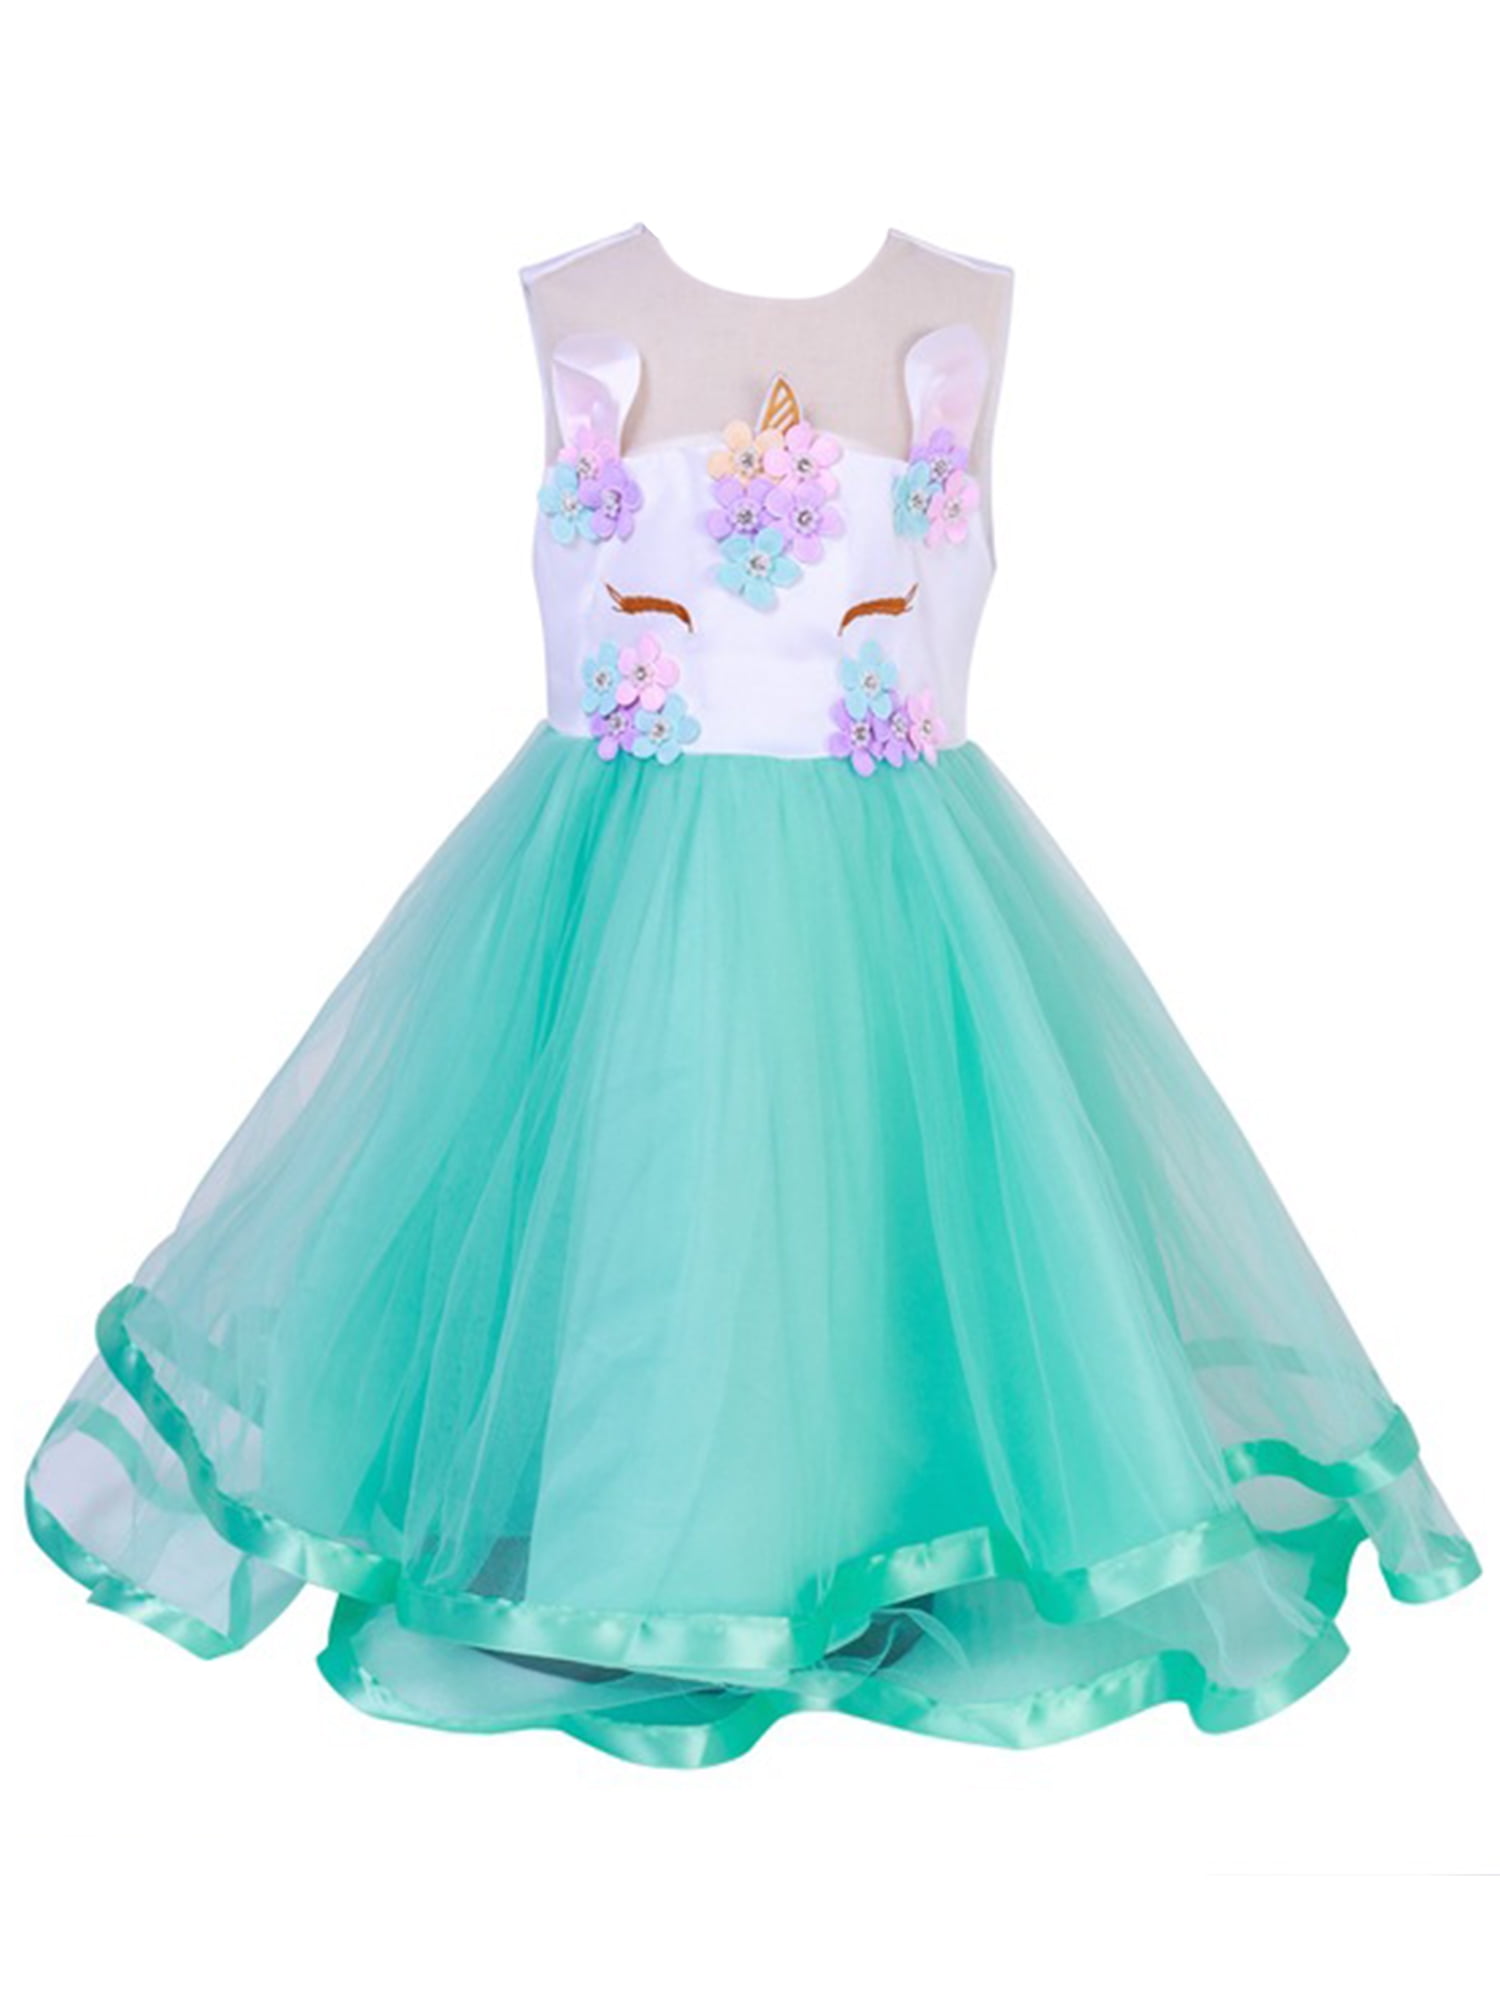 Unicorn Party Dress for Little Girls Kids Teens Fancy Party Costume 2-10  Years Birthday Wedding Party Pageant Princess Prom Formal Dresses -  